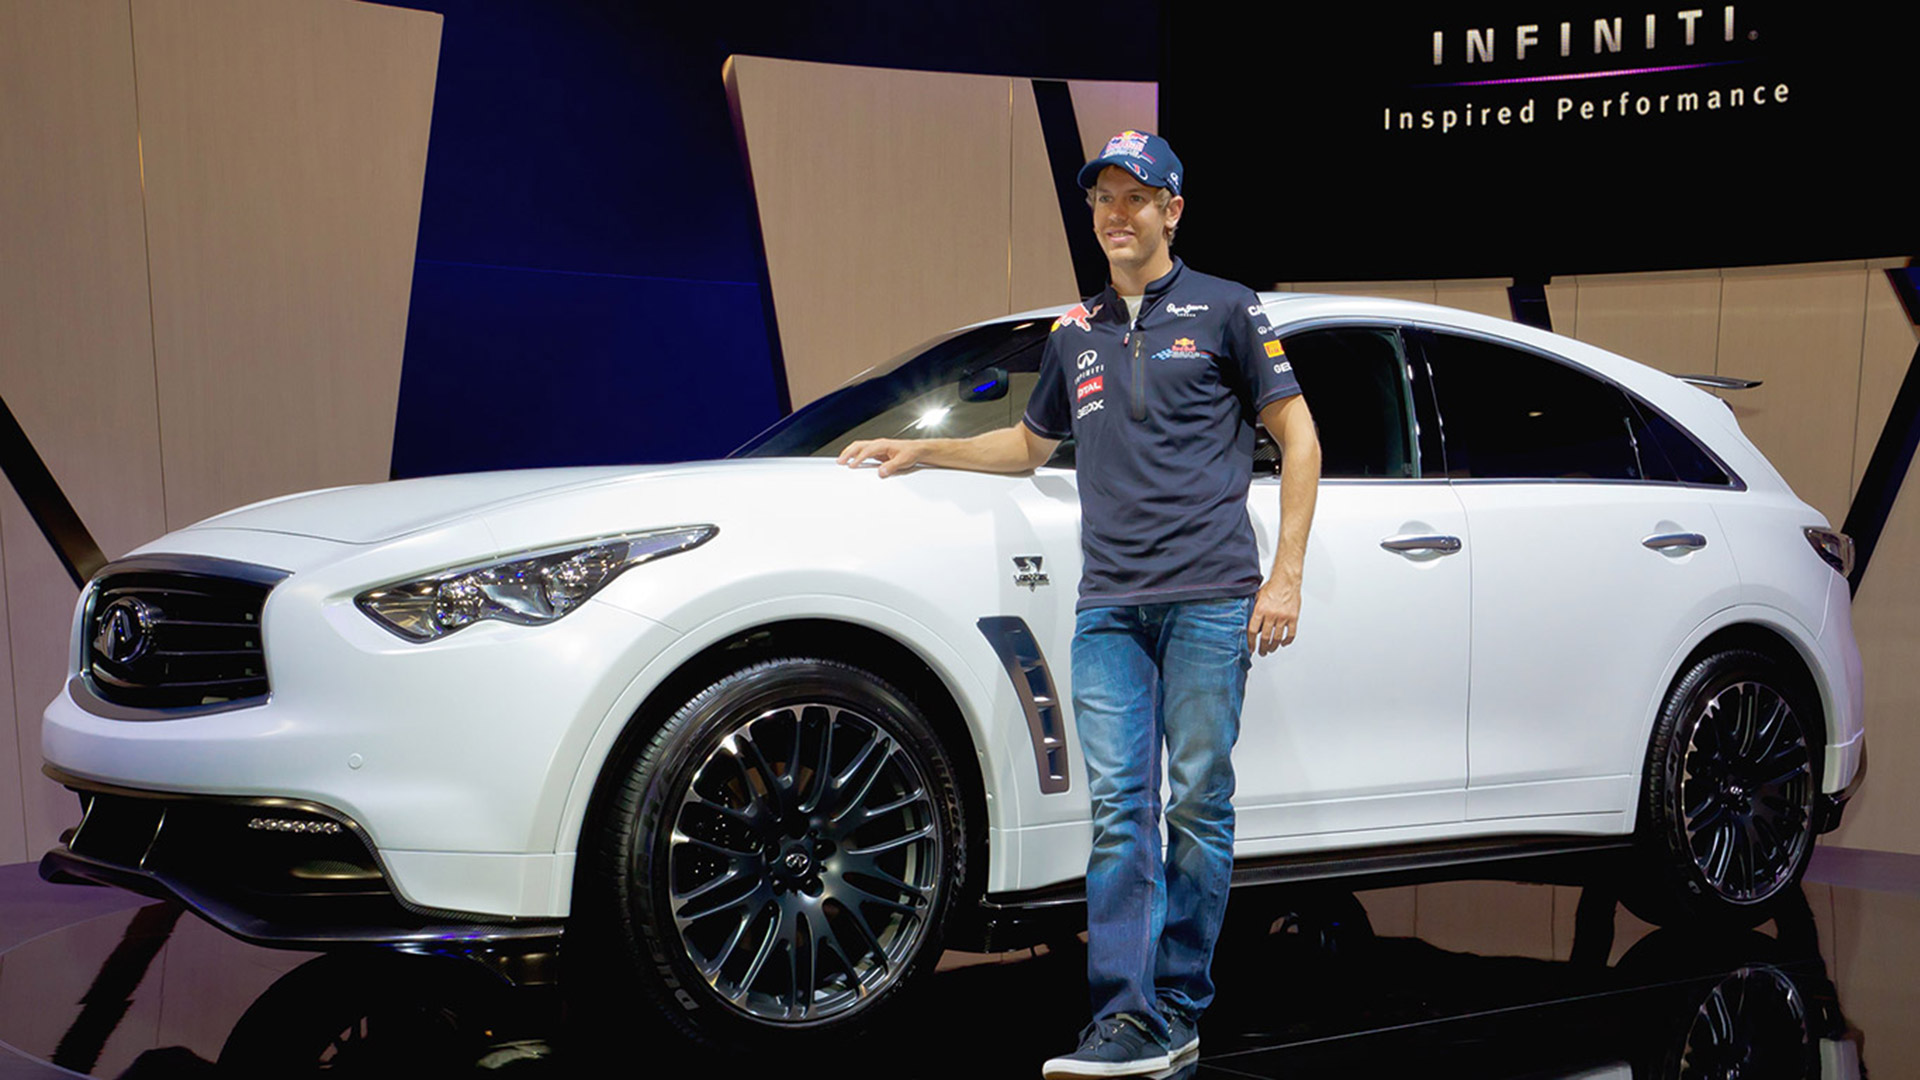 Infiniti rewards Vettel with a special edition FX50